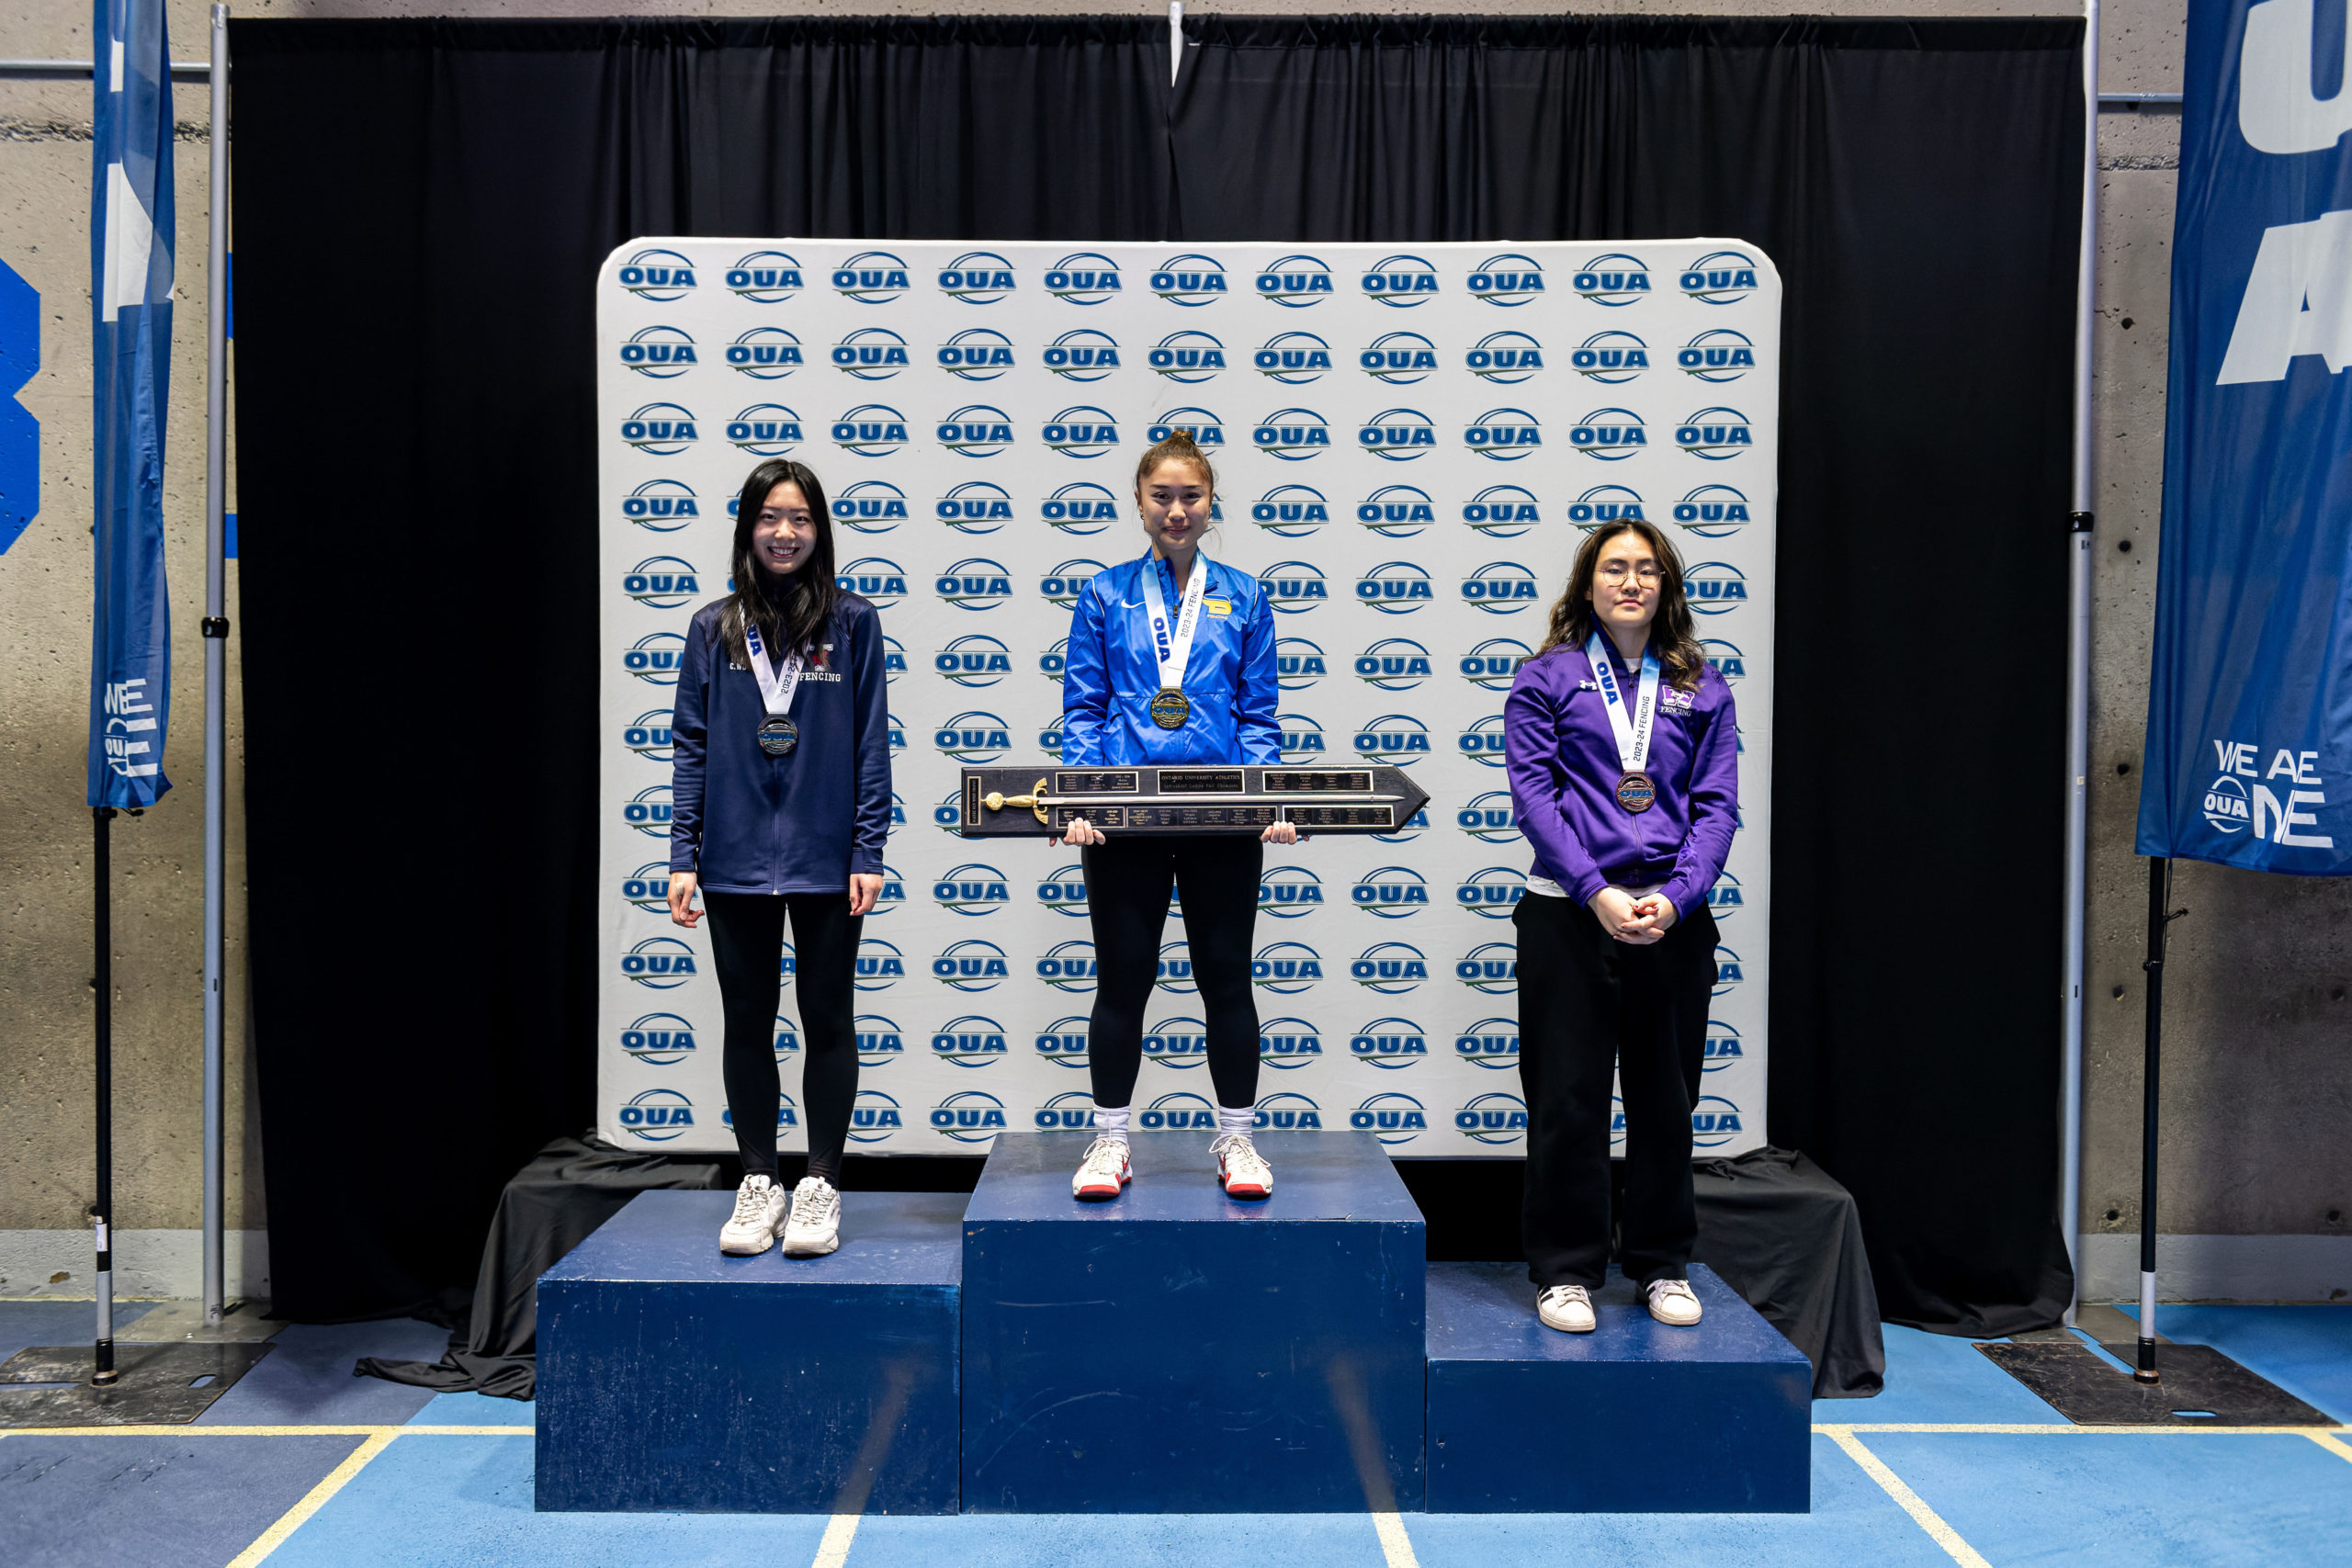 Erika Dominguez stands atop the OUA podium as the champion